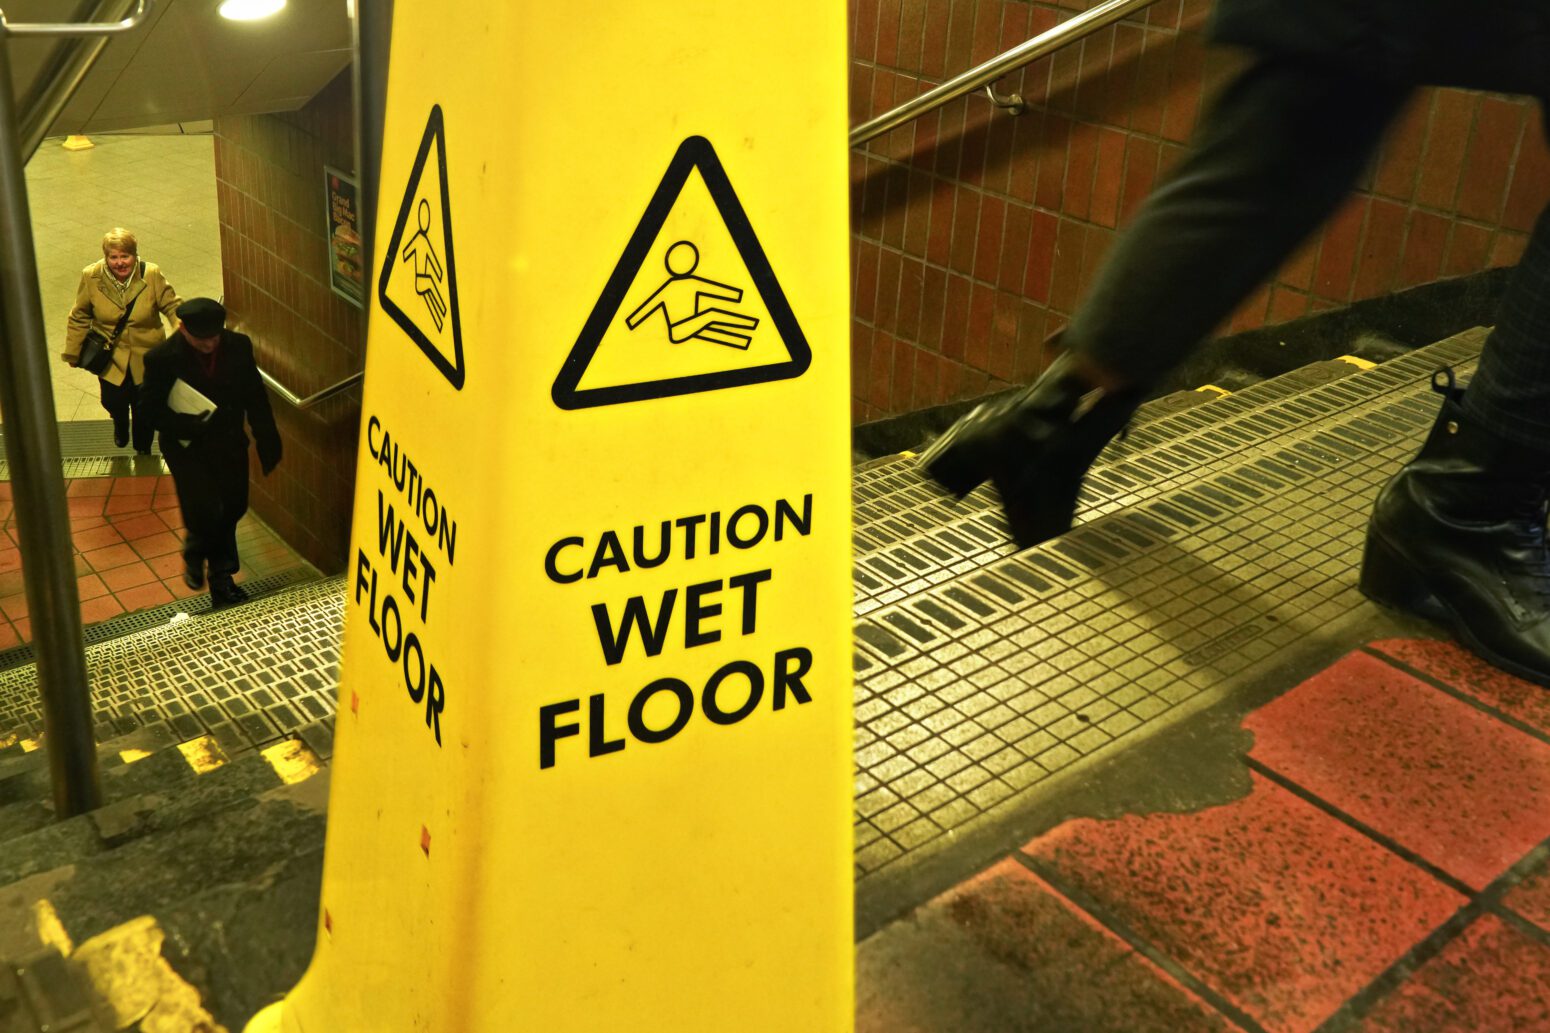 Establishing Negligence: A Step-by-Step Guide for Potential Public Liability Claimants